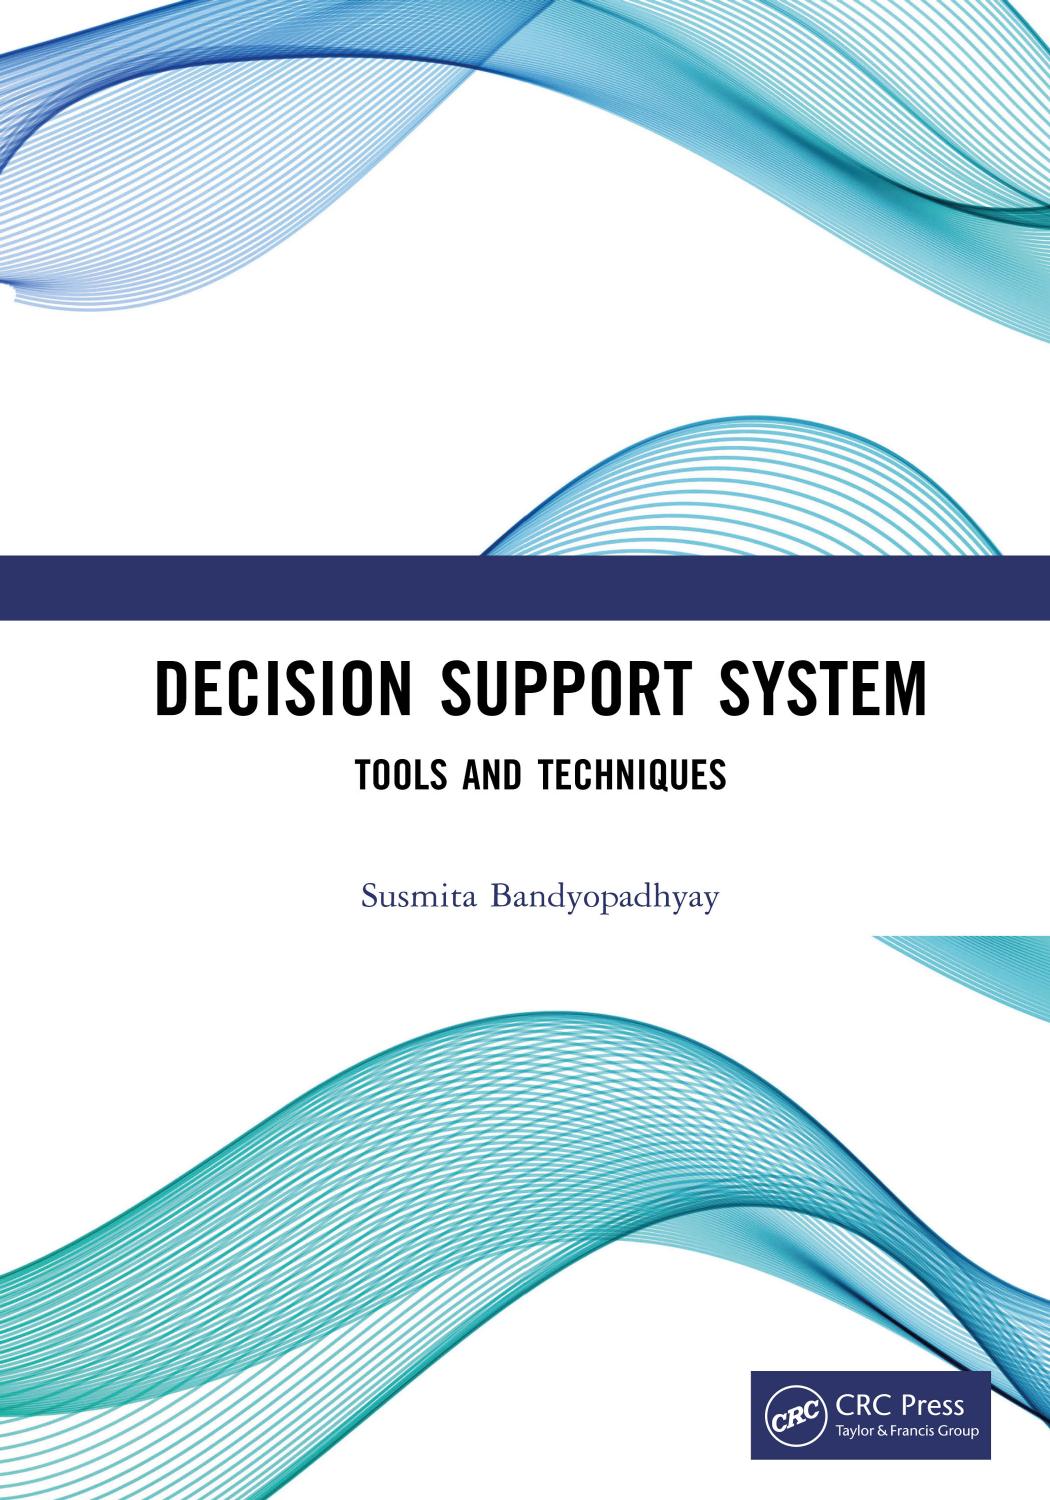 Decision Support System. Tools and Techniques by Susmita Bandyopadhyay